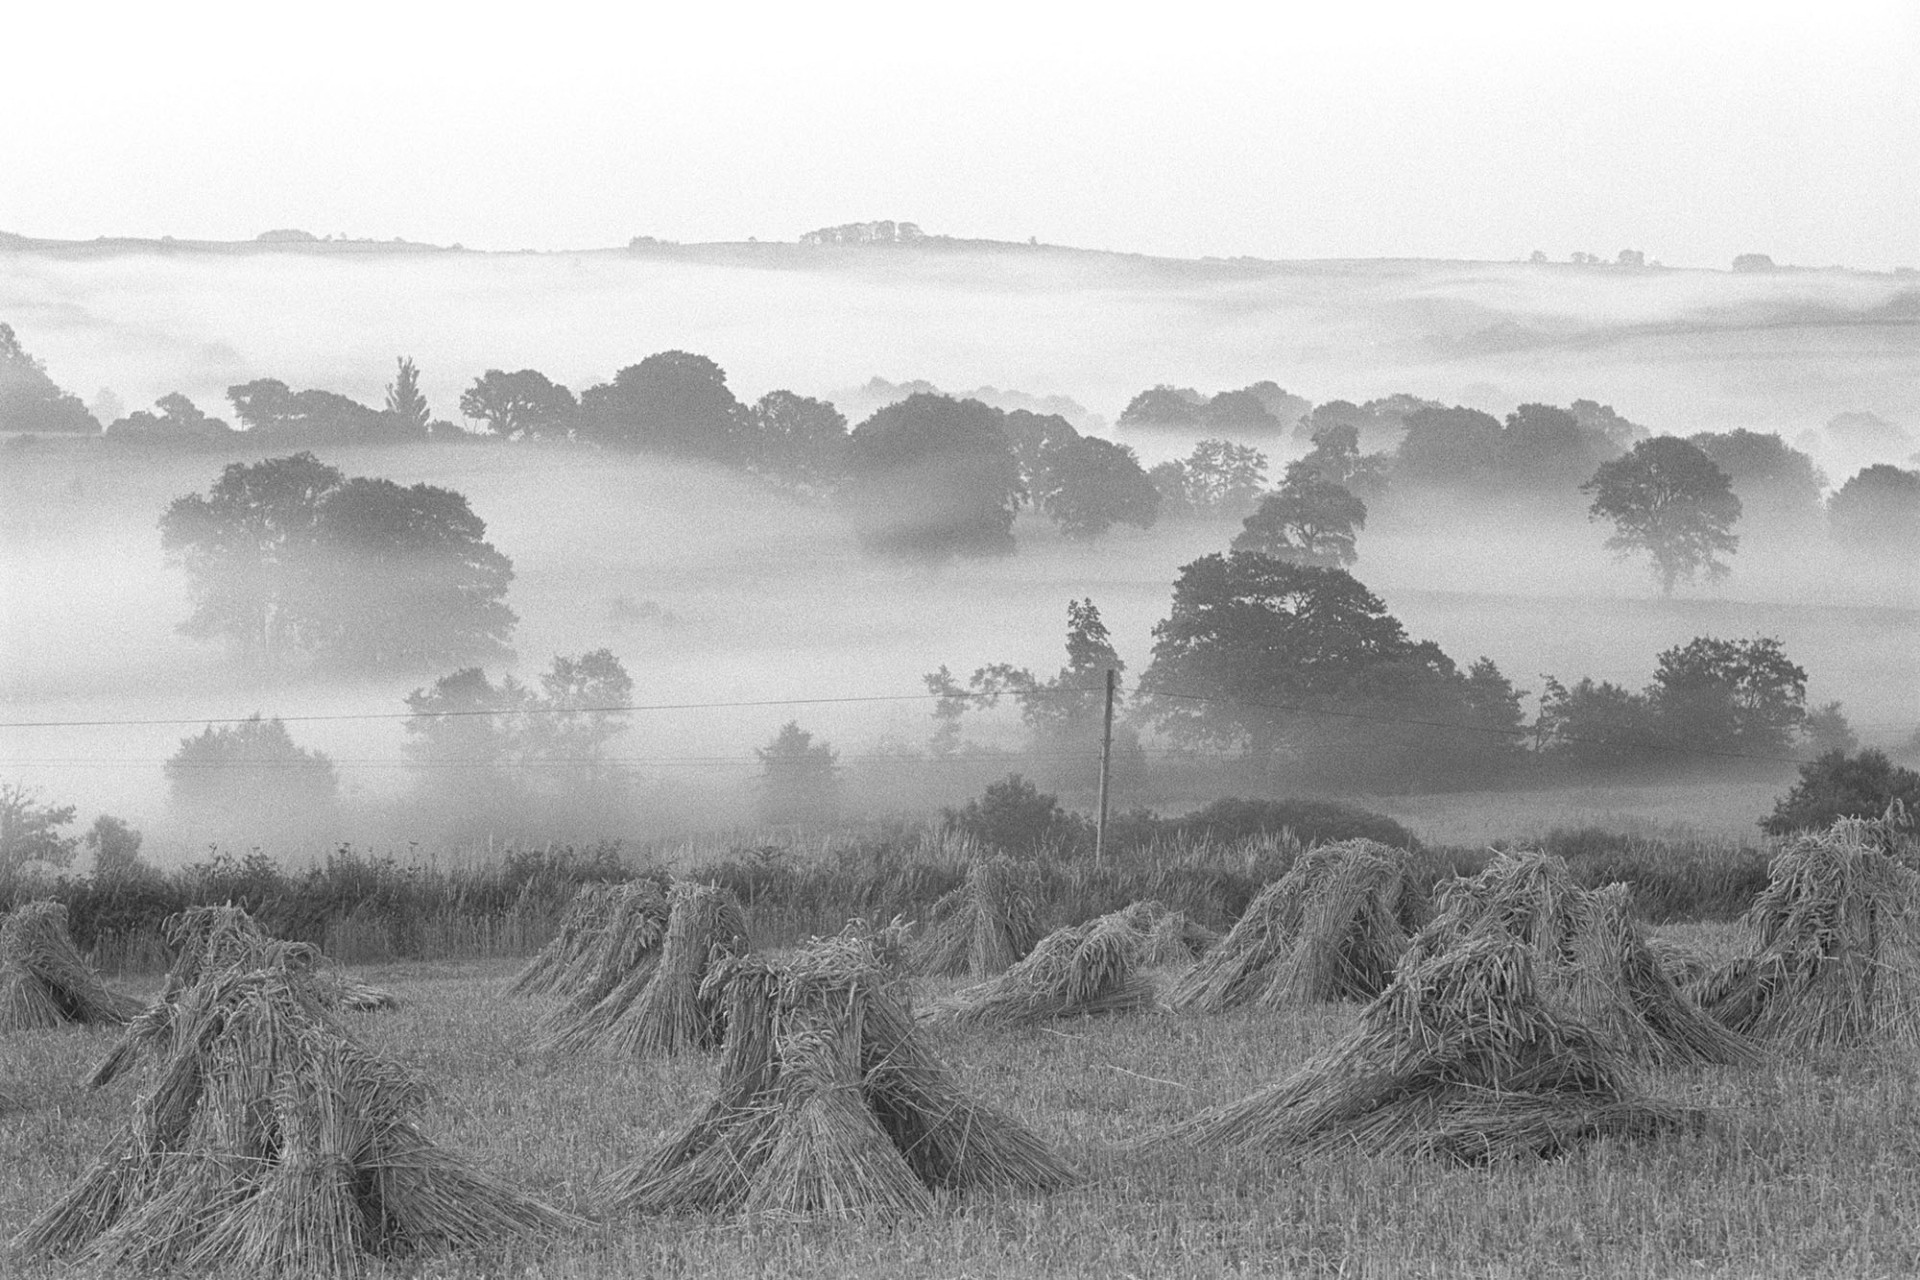 Stooks with early morning mist in valley beyond. 
[Early morning mist in the River Taw valley at Bridge Reeve, Ashreigney. Tree tops are visible above the mist and in the foreground is a field with stooks of corn.]